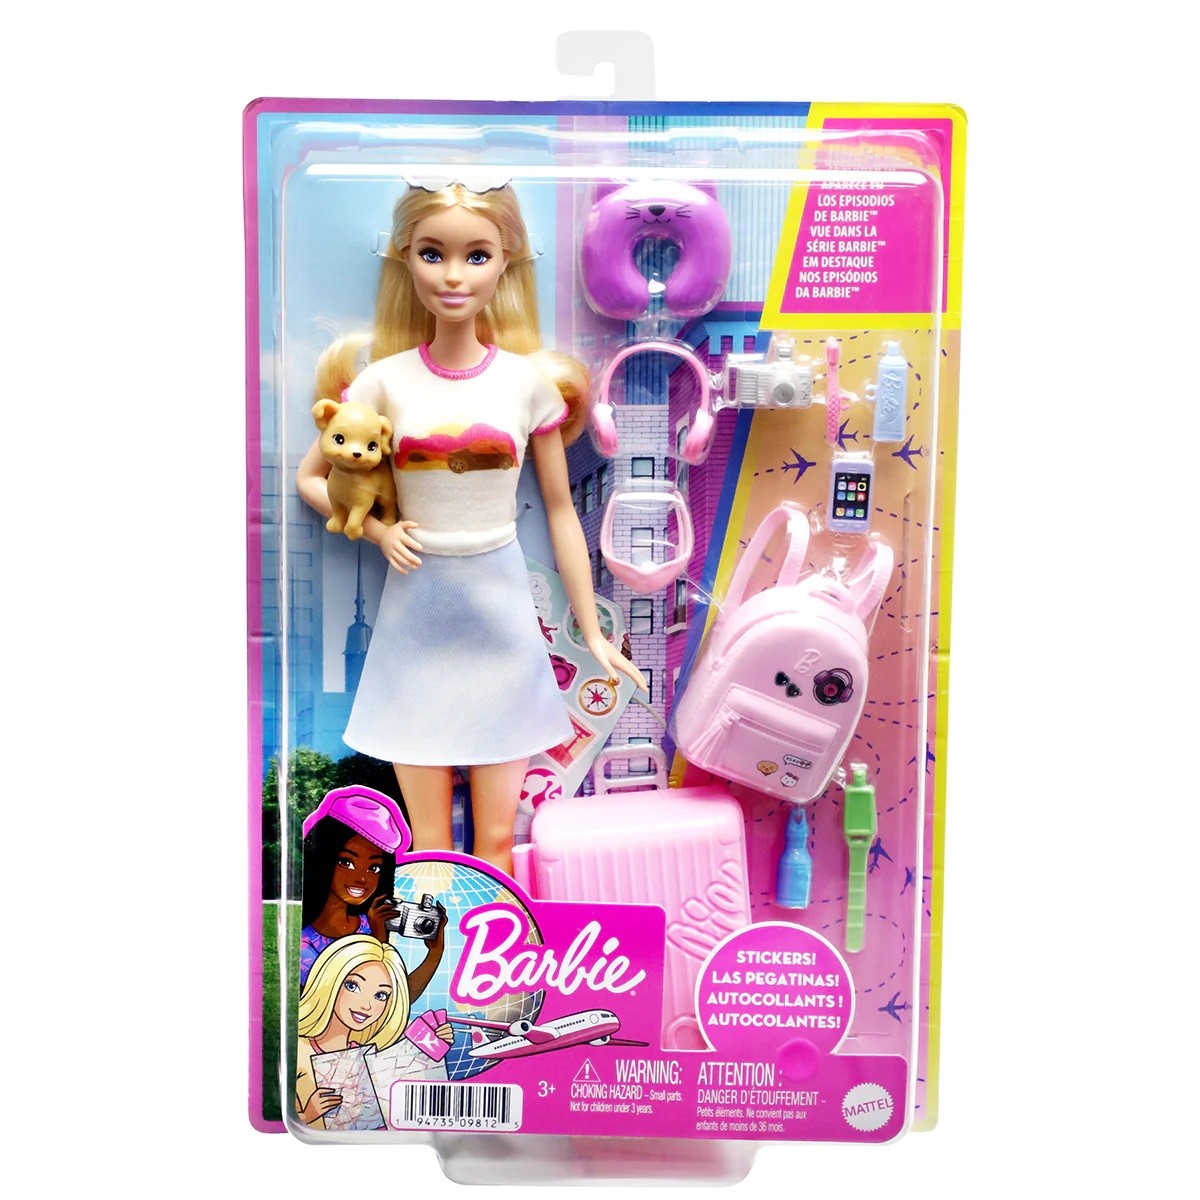 Barbie Doll And Accessories, 'Malibu' Travel Set With Puppy And 10+